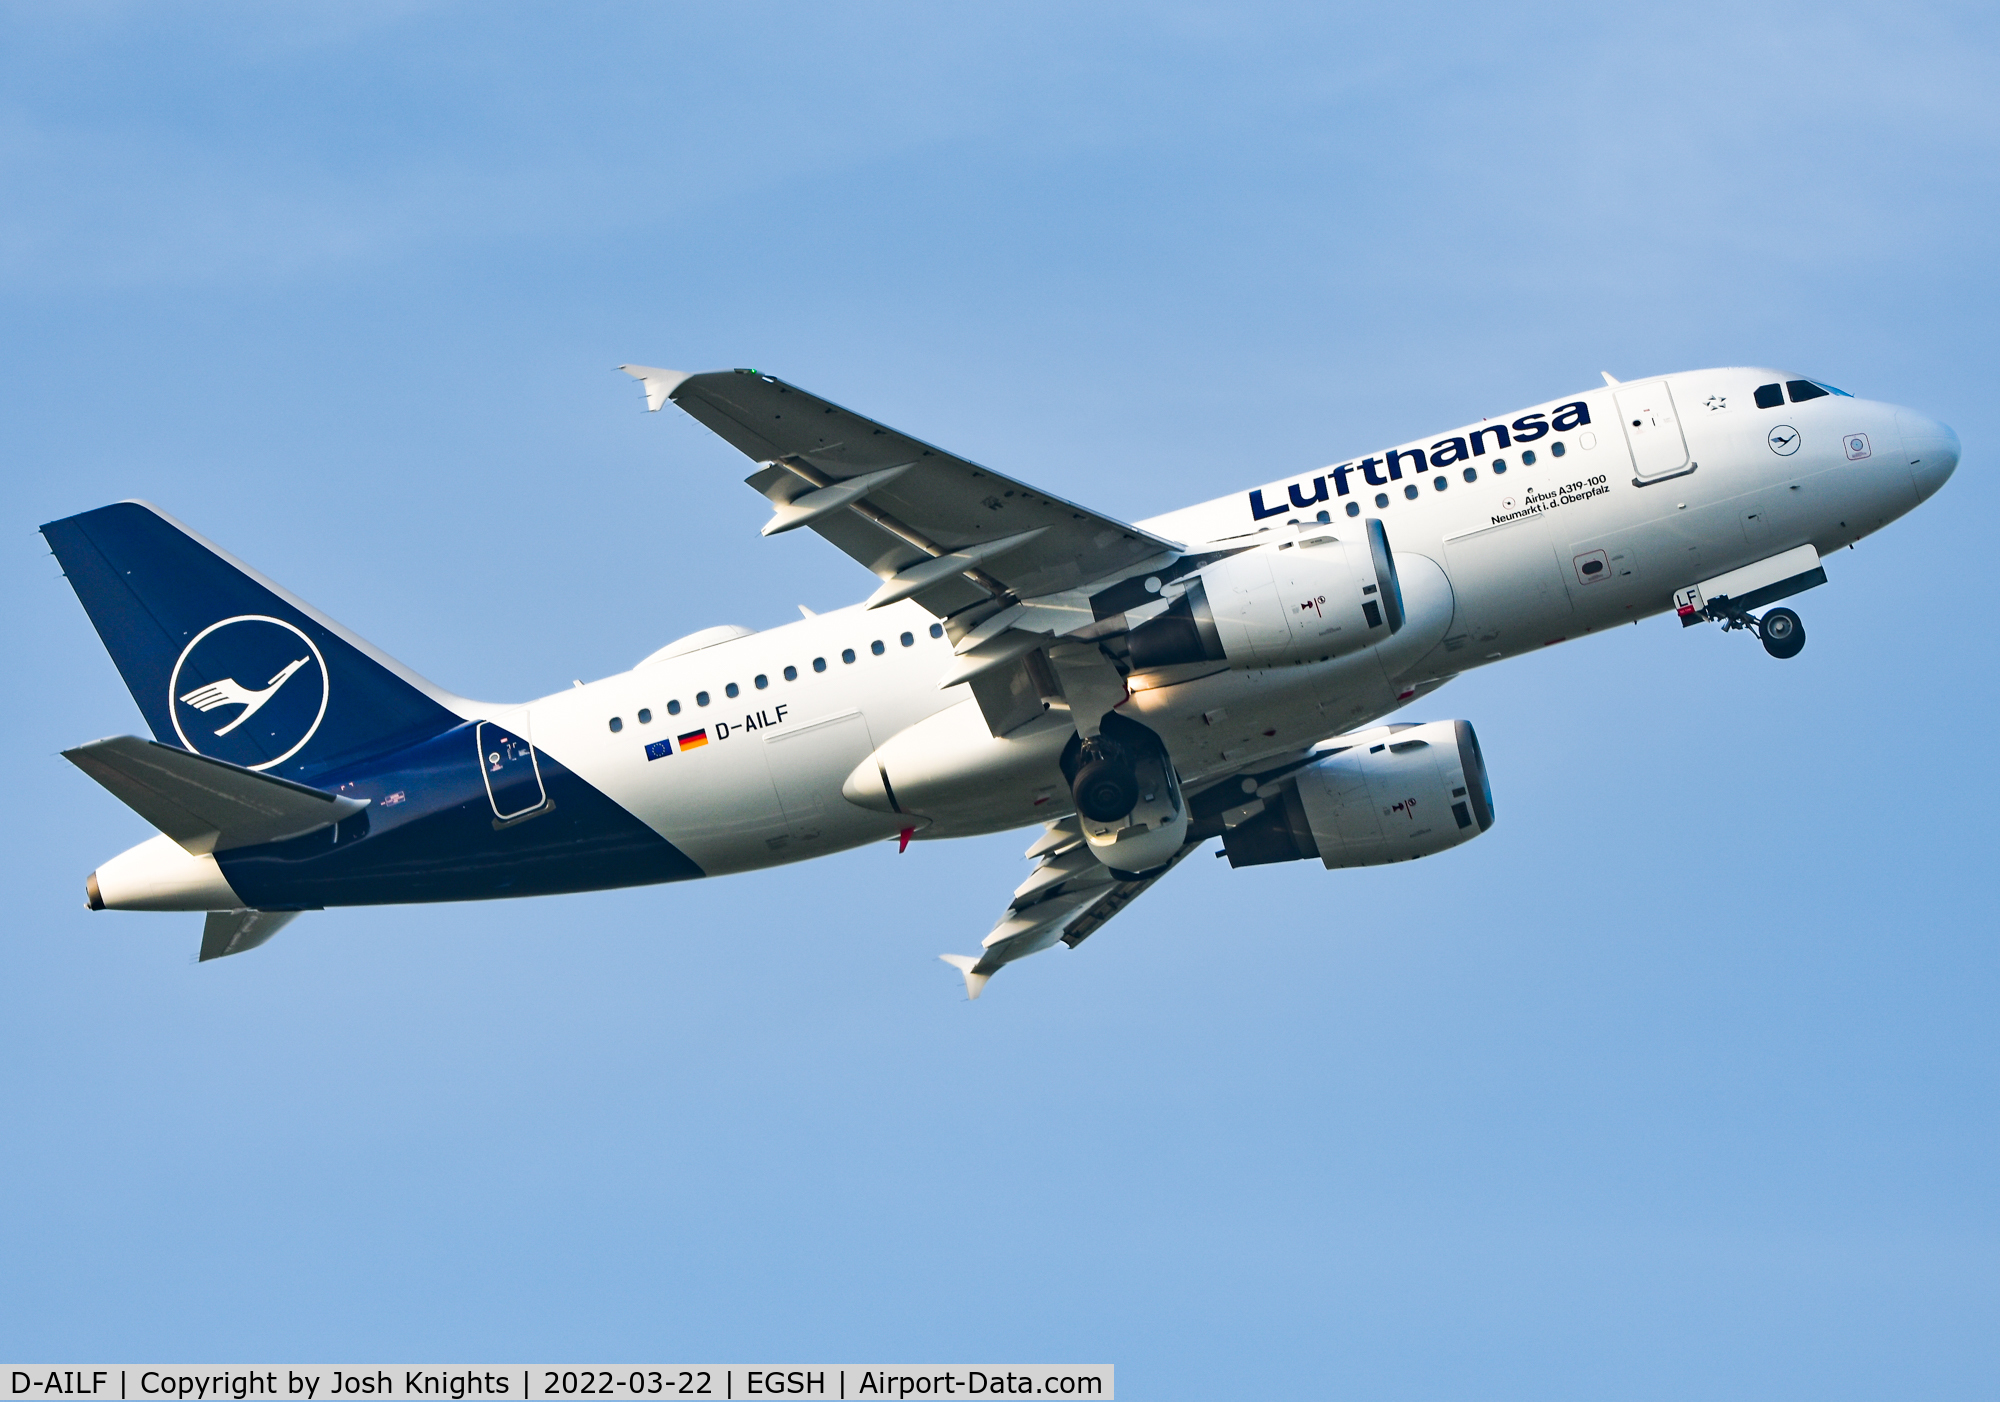 D-AILF, 1996 Airbus A319-114 C/N 636, Departing In The Updated Lufthansa Livery.